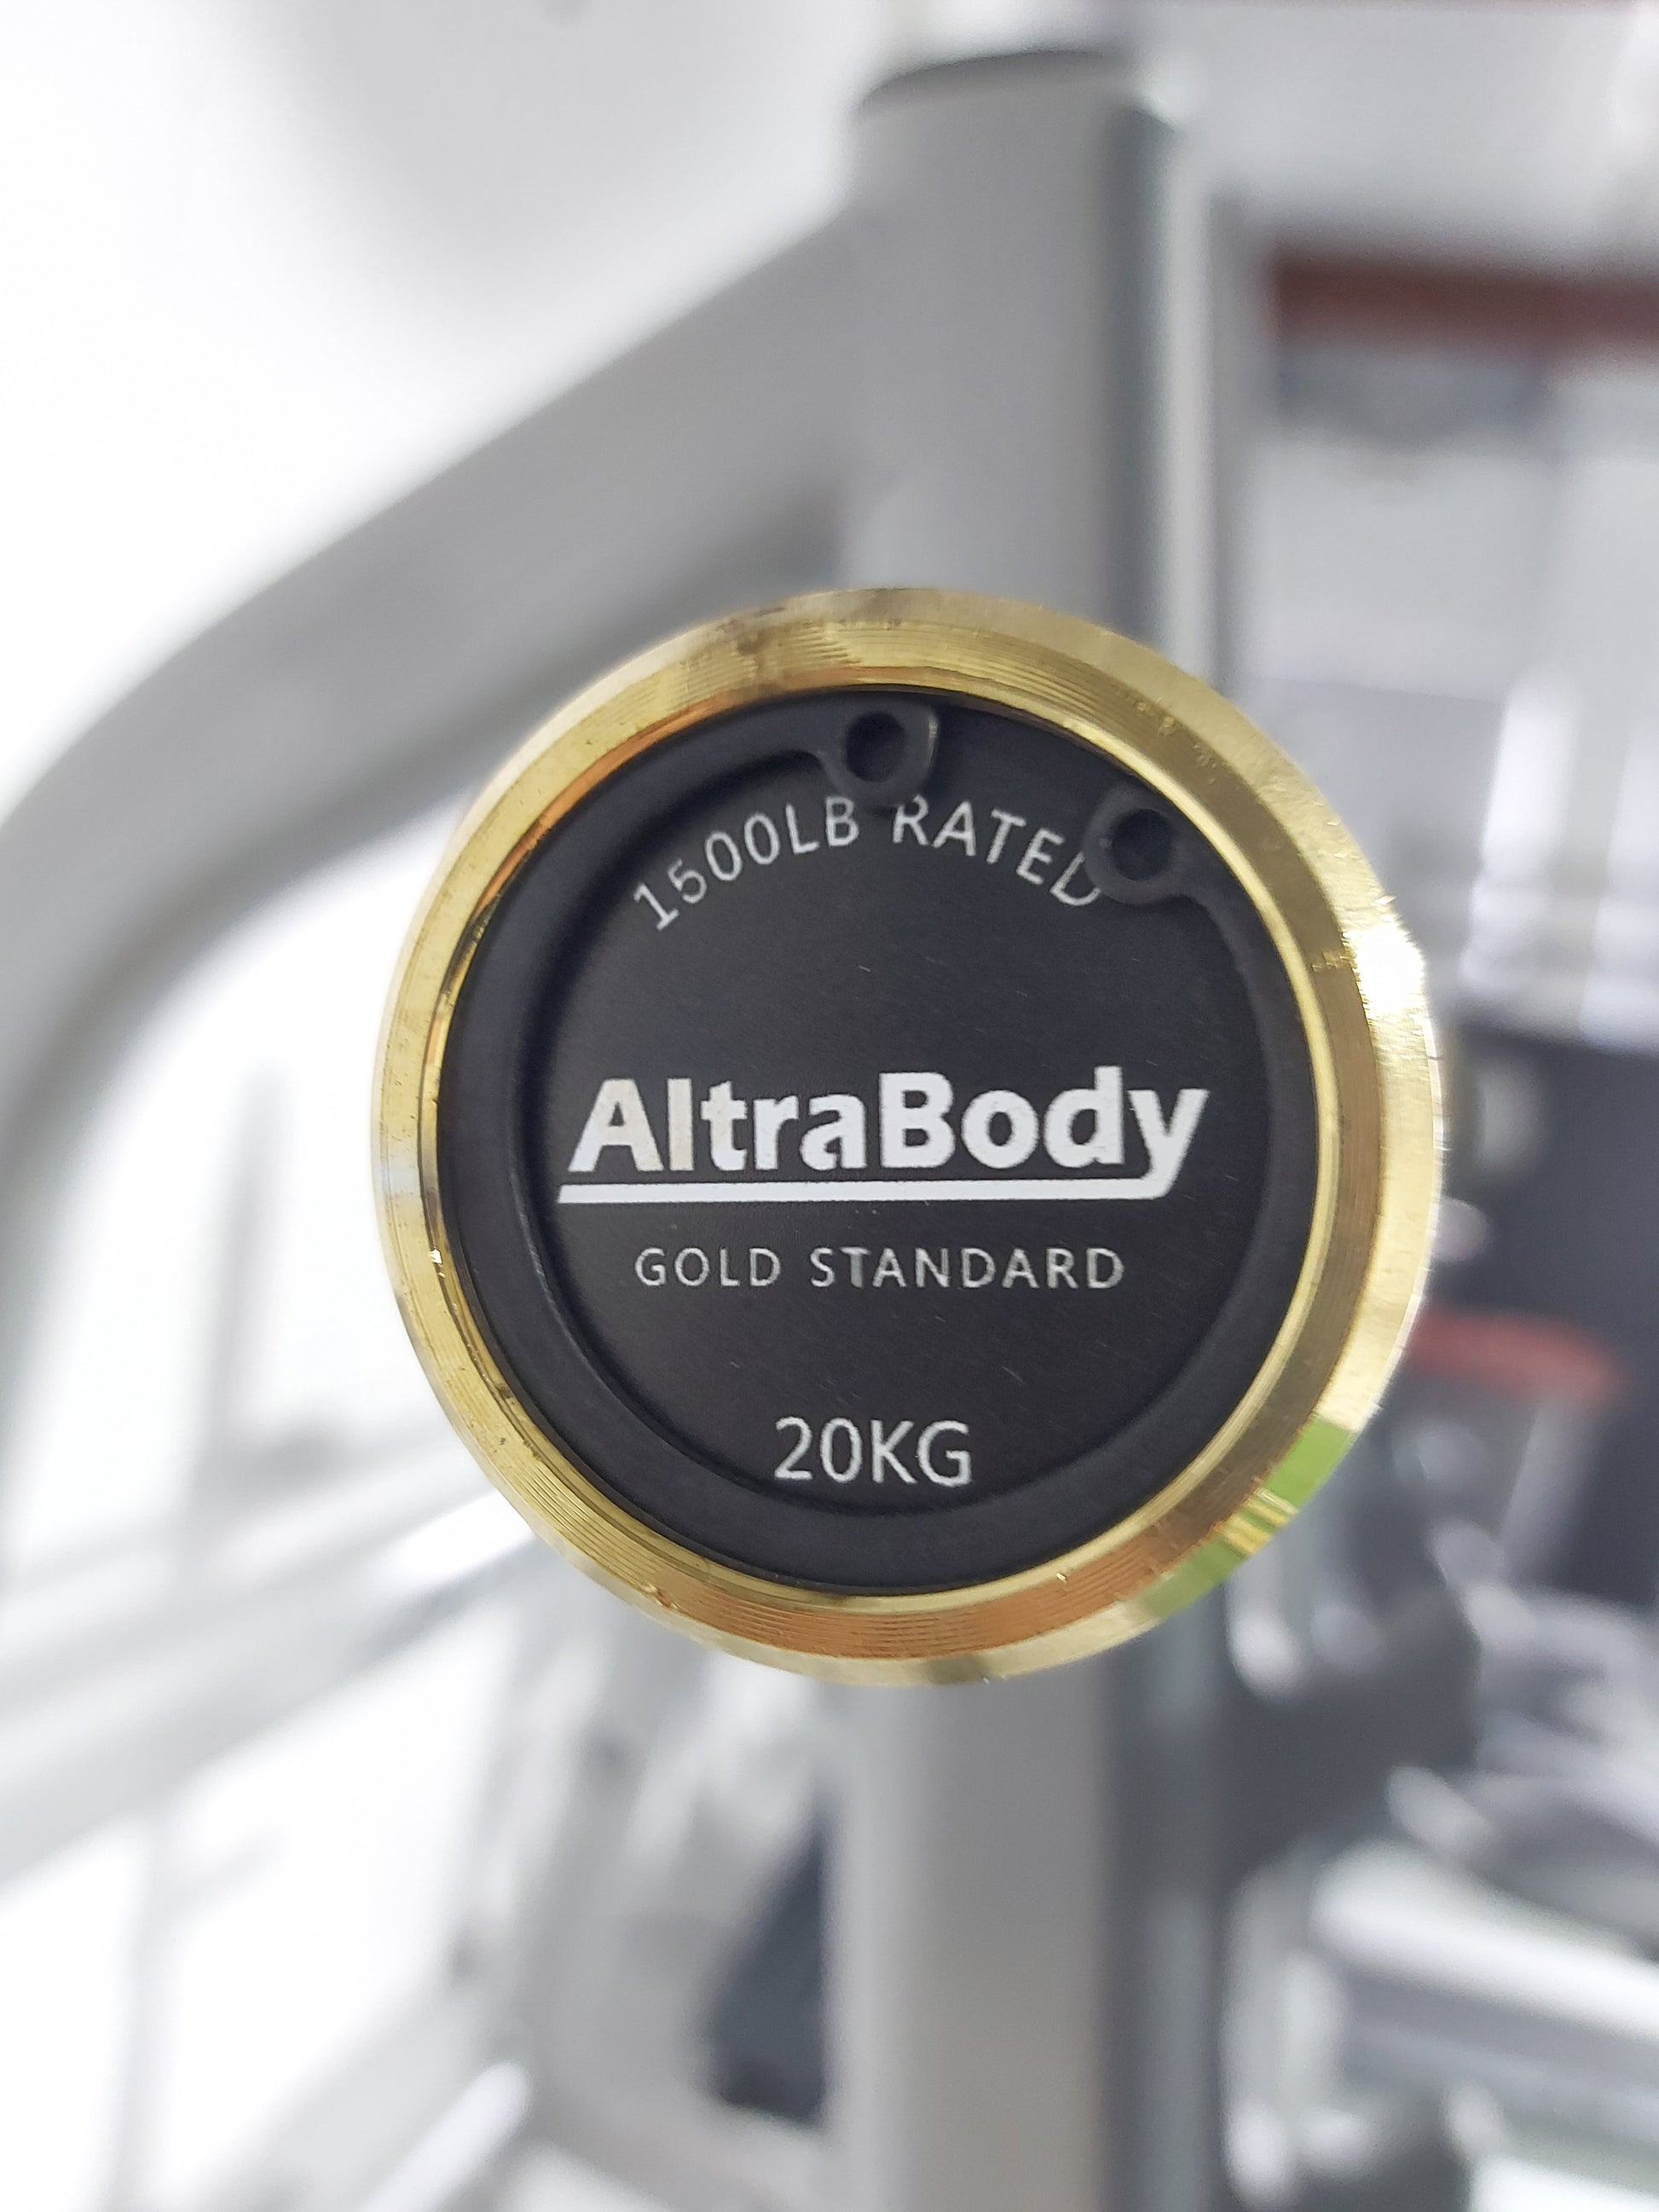 AltraBody-Gold-7ft-20KG-Olympic-Barbell-1500lb-rating-6